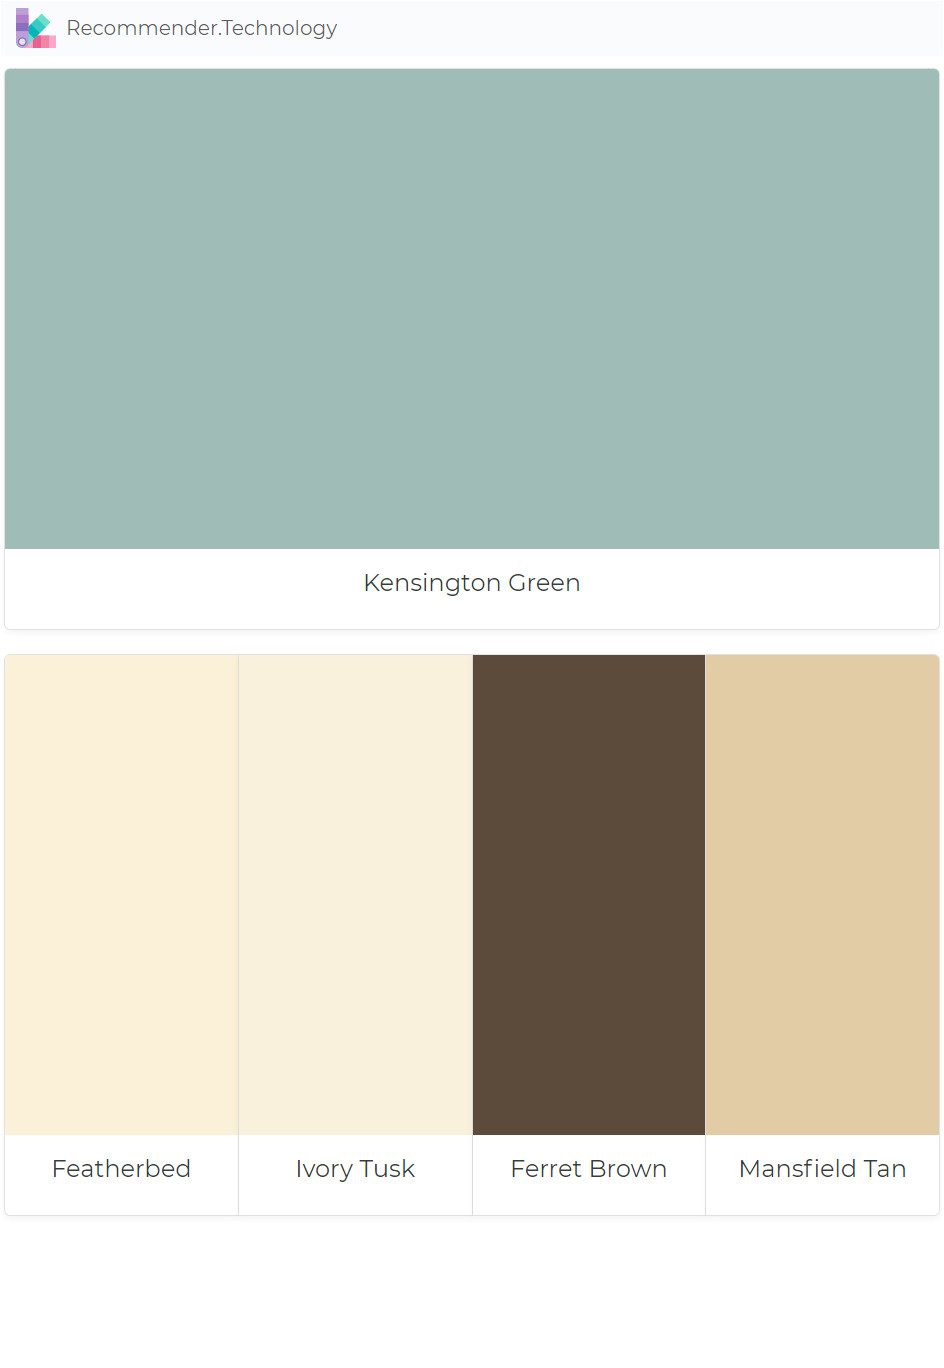 kensington green featherbed ivory tusk ferret brown mansfield tan paint color palettes